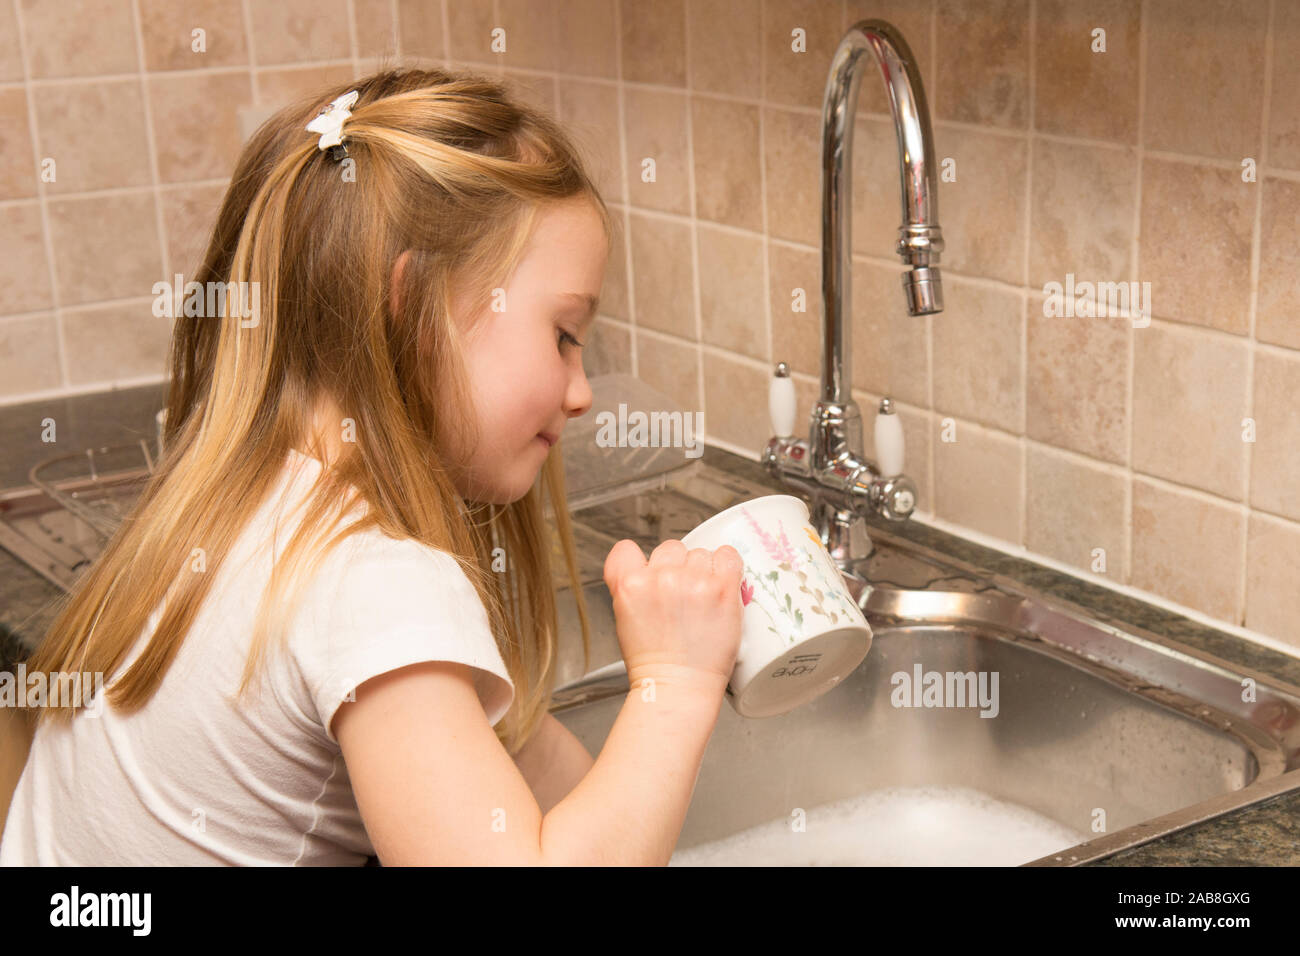 https://c8.alamy.com/comp/2AB8GXG/young-child-washing-up-at-kitchen-sink-home-chores-smiling-happy-2AB8GXG.jpg